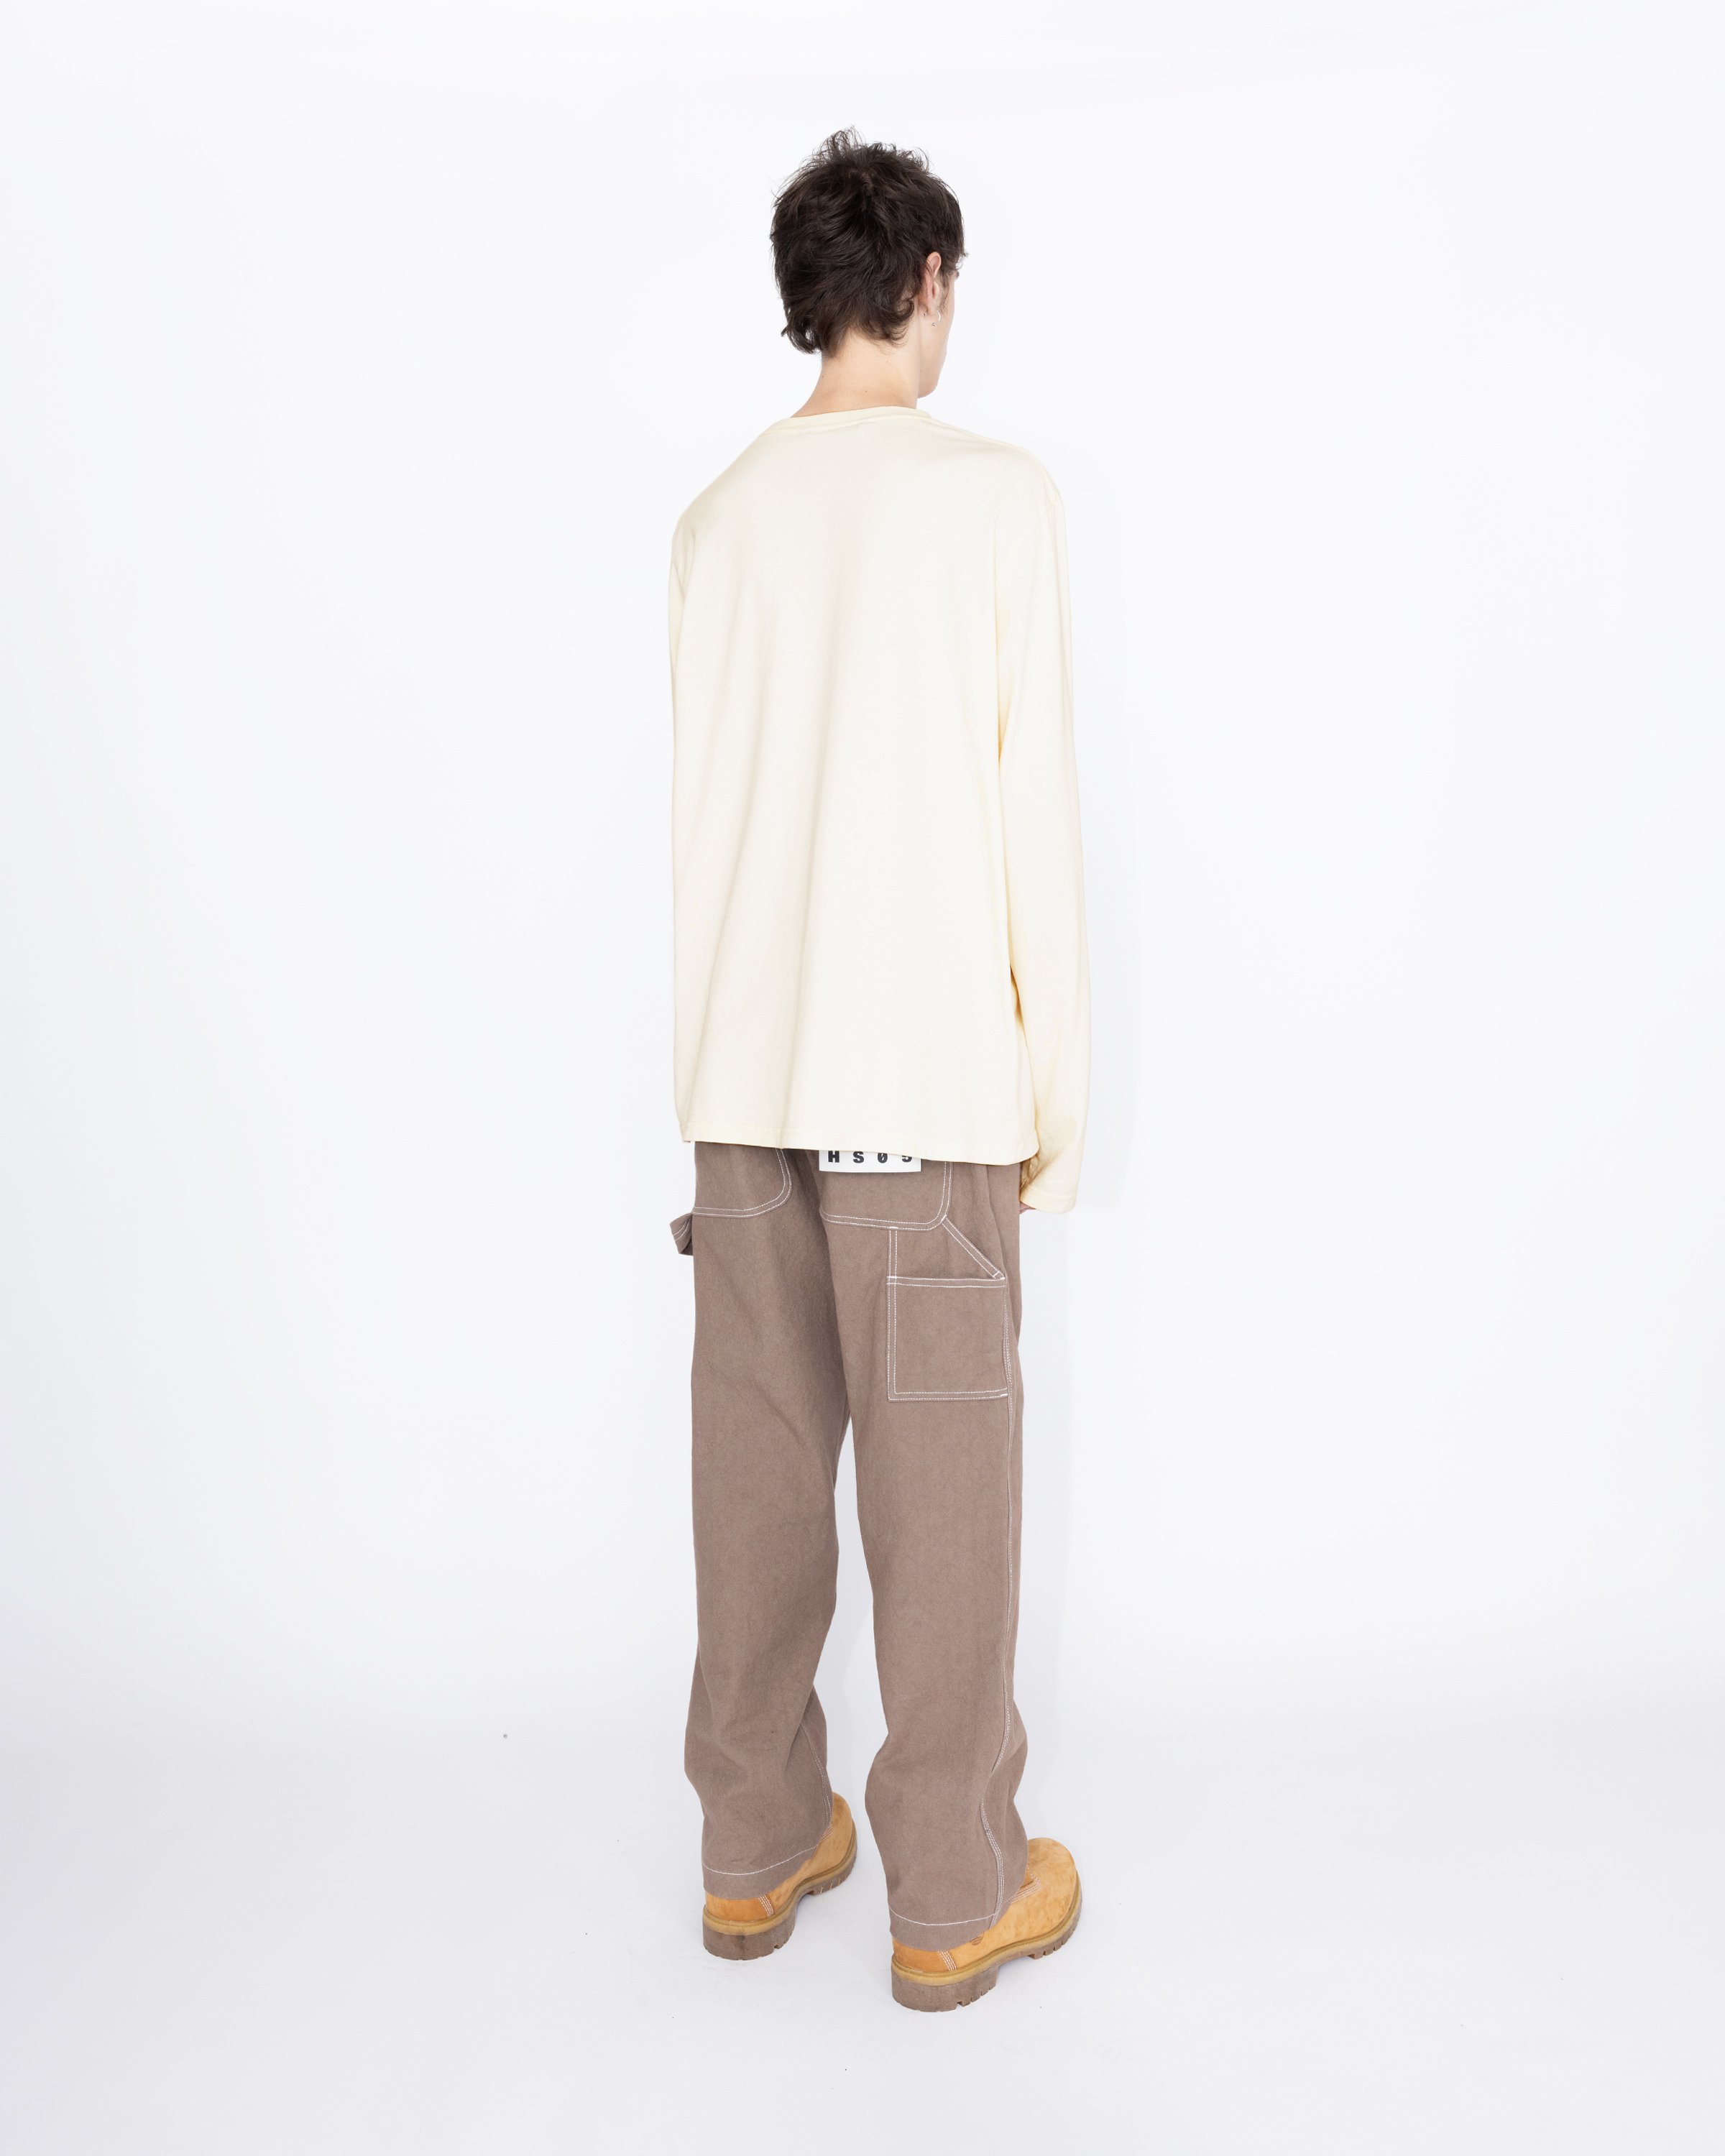 Highsnobiety HS05 - Pigment Dyed Boxy Long Sleeves Jersey Natural - Clothing - Beige - Image 5